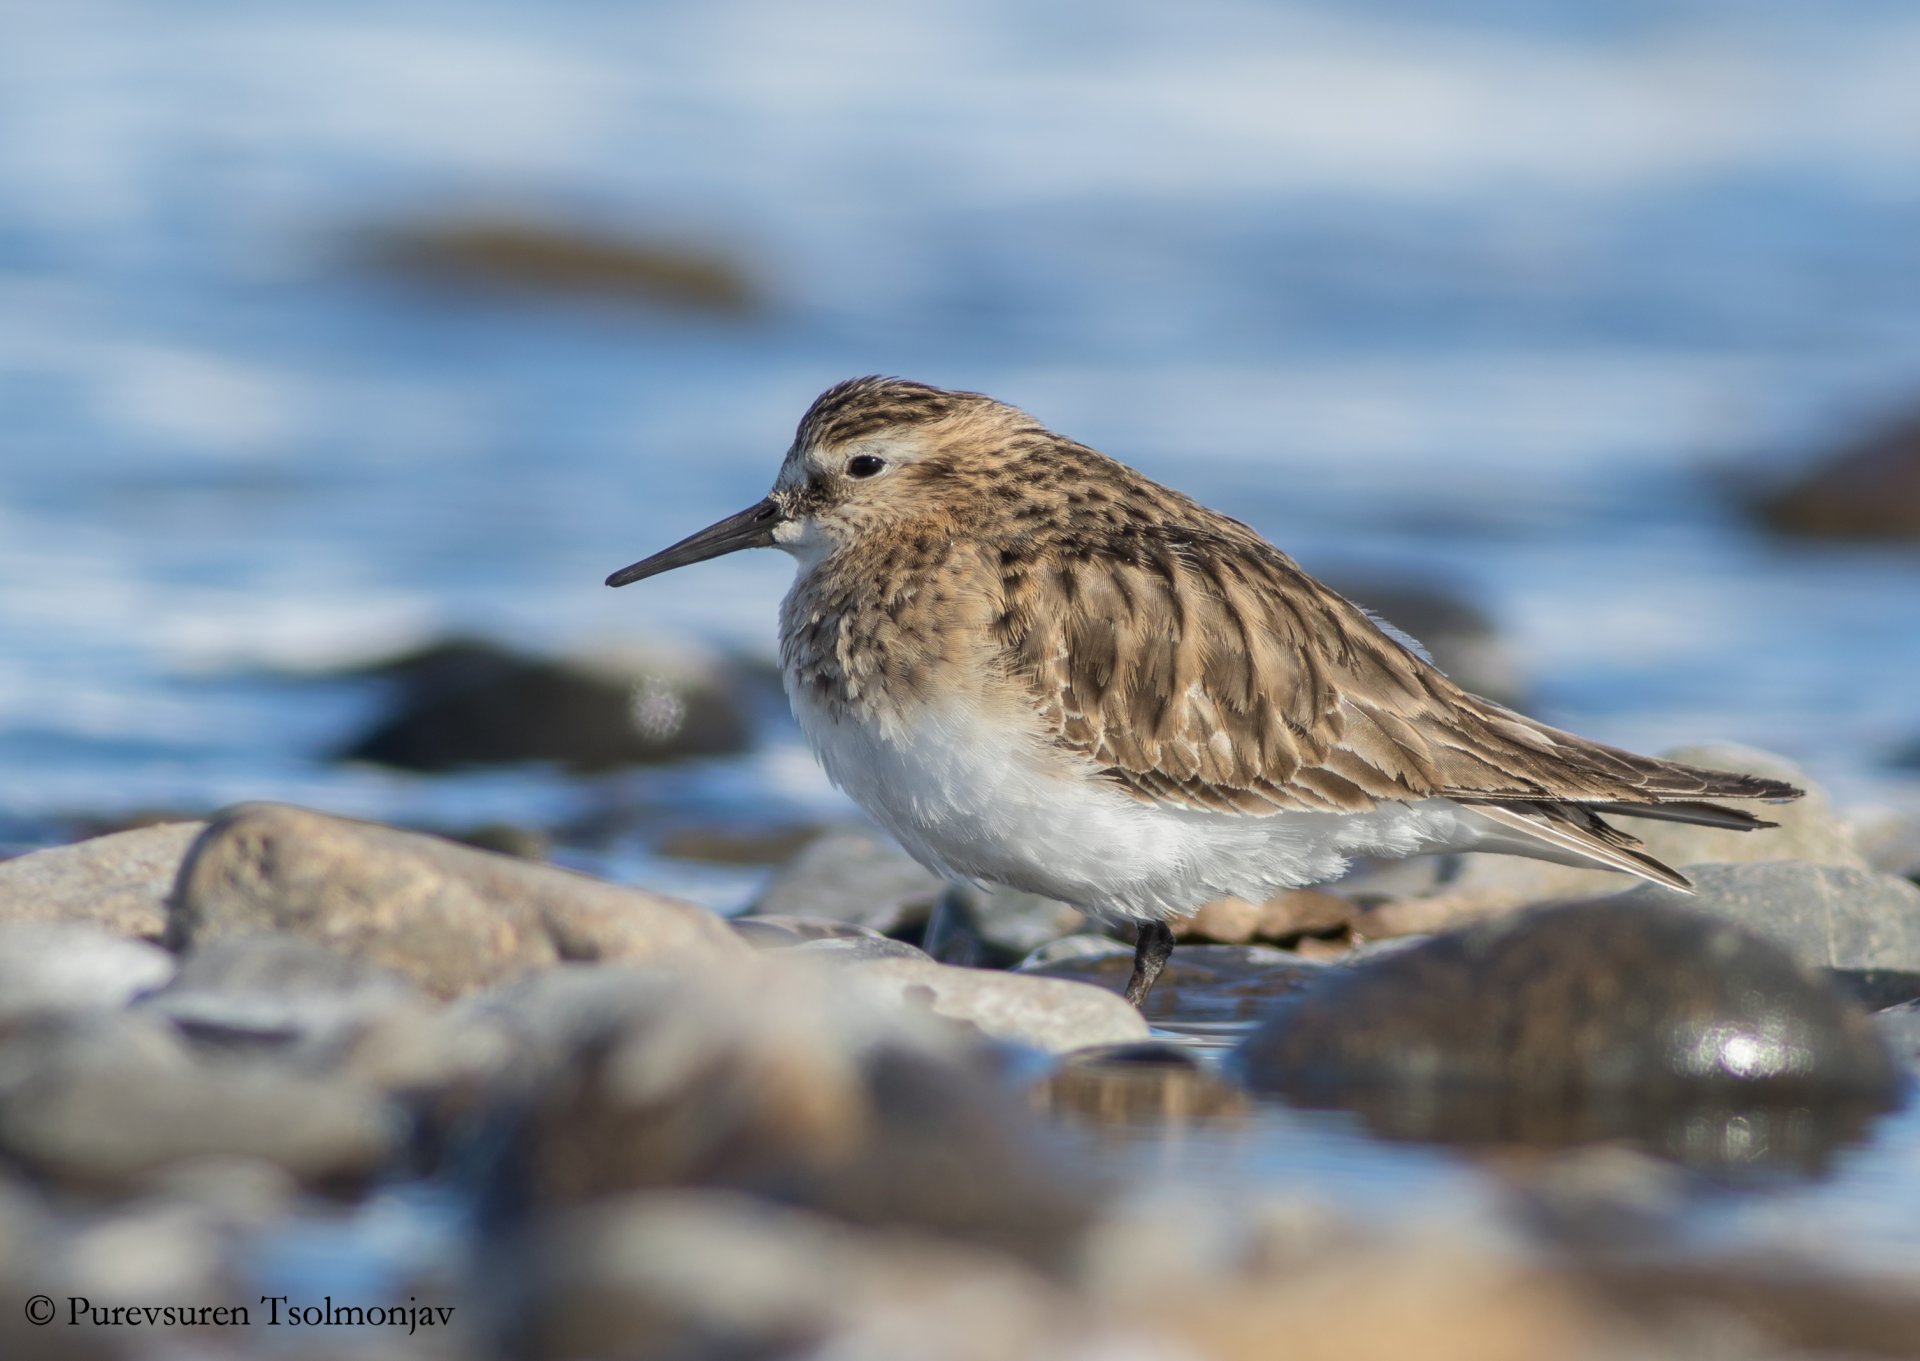 A first record of Baird's Sandpiper for Mongolia